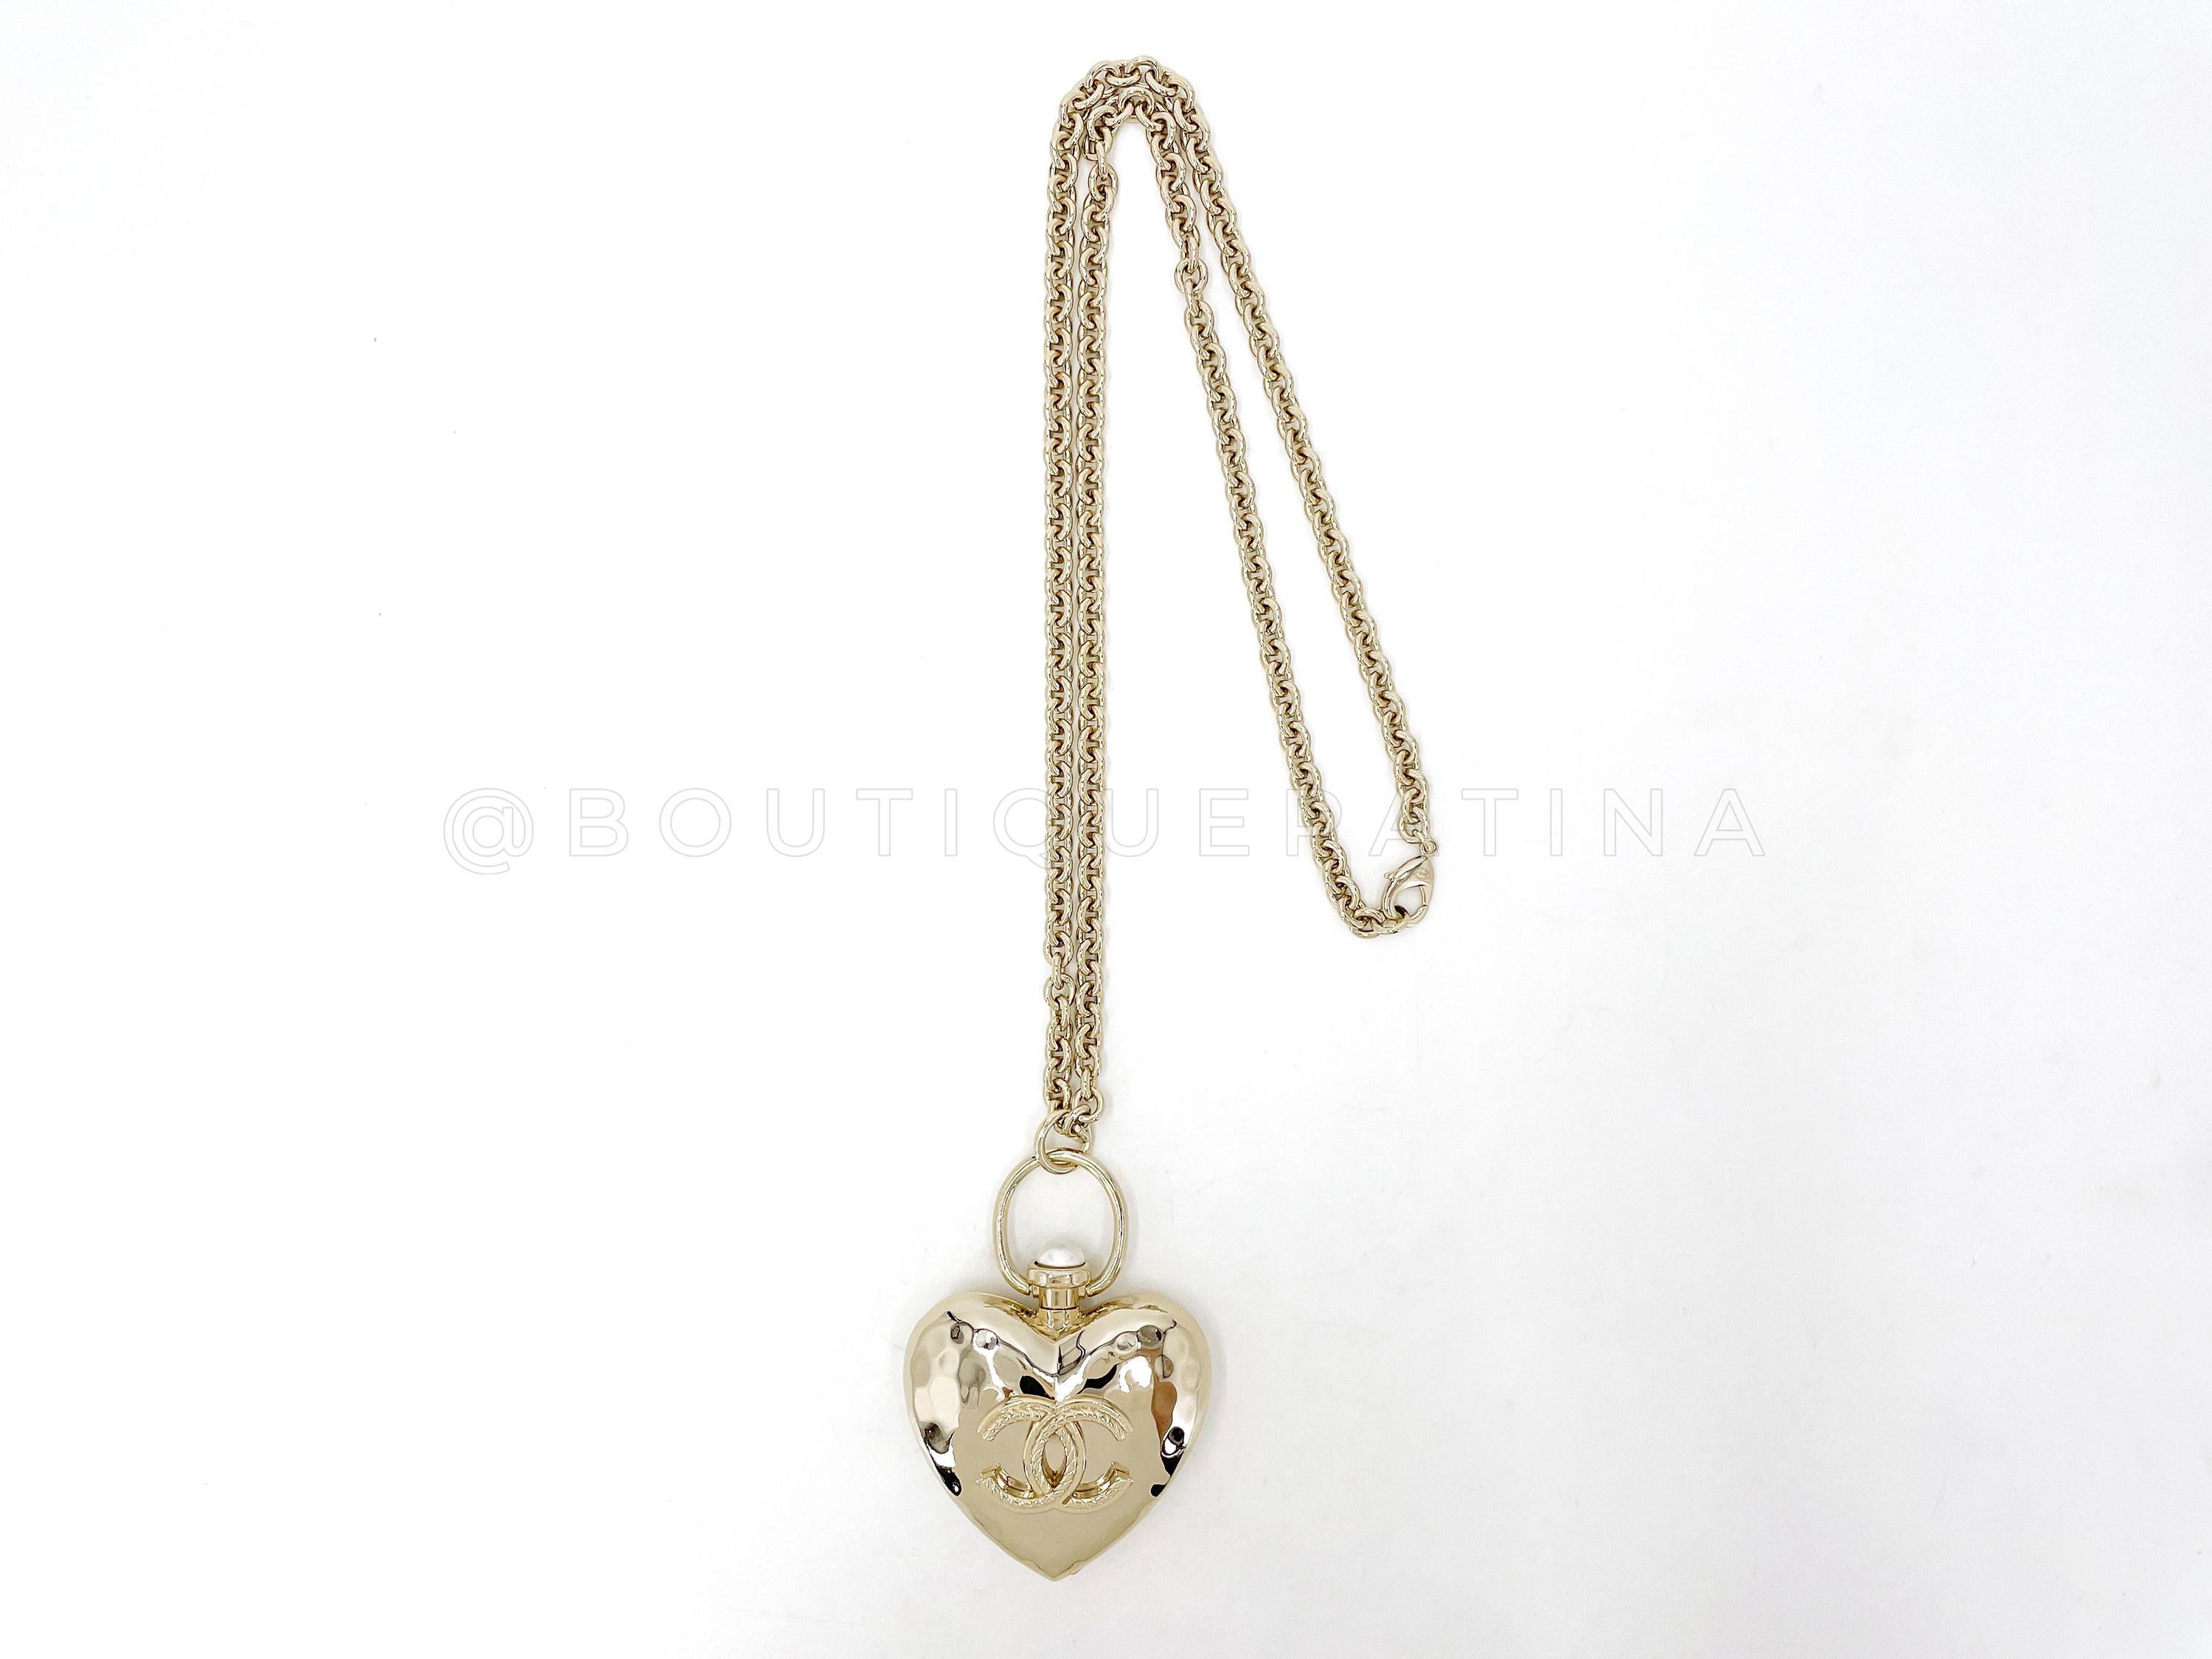 Store item: 66949
Chanel 22C Giant Heart Locket Pendant Necklace

From the 2022 Cruise collection, this item had extremely limited distribution. 32 inch long necklace can be worn double or single

Large 3.5 inch heart pendant locket opens up to